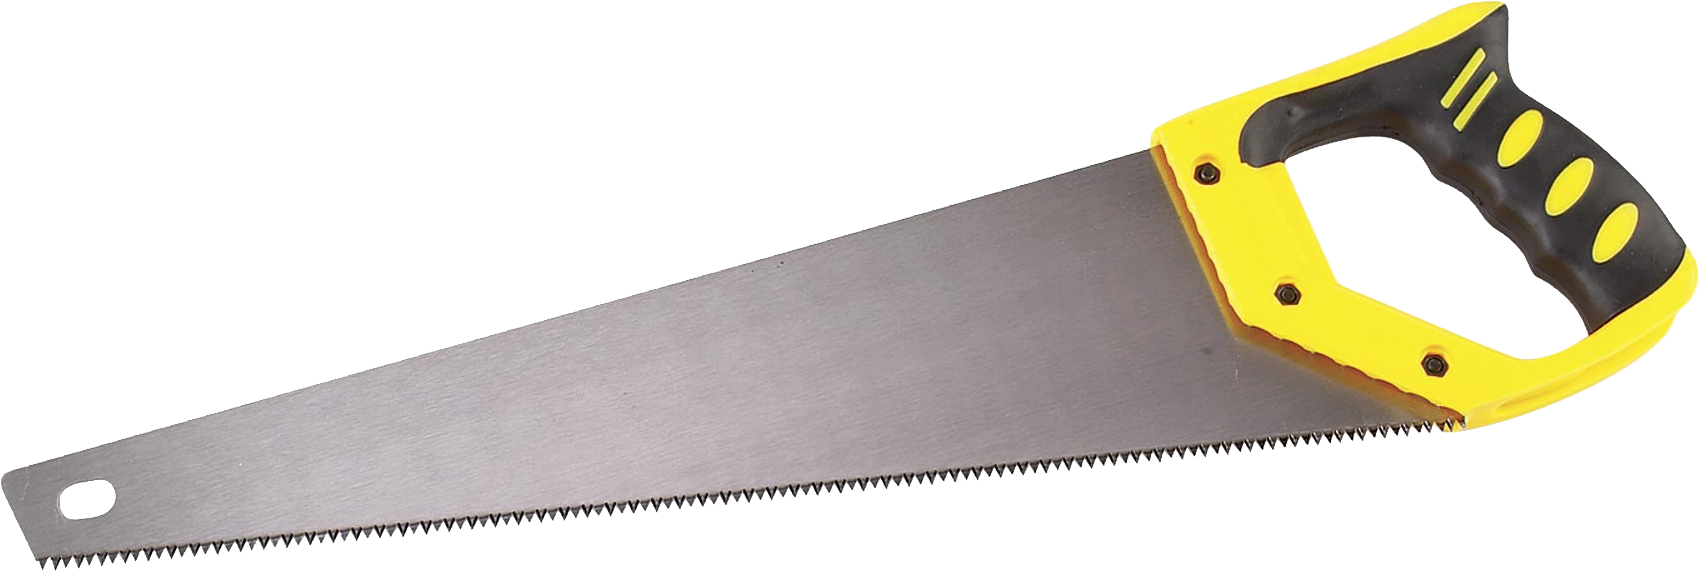 Download Hand Saw PNG images 